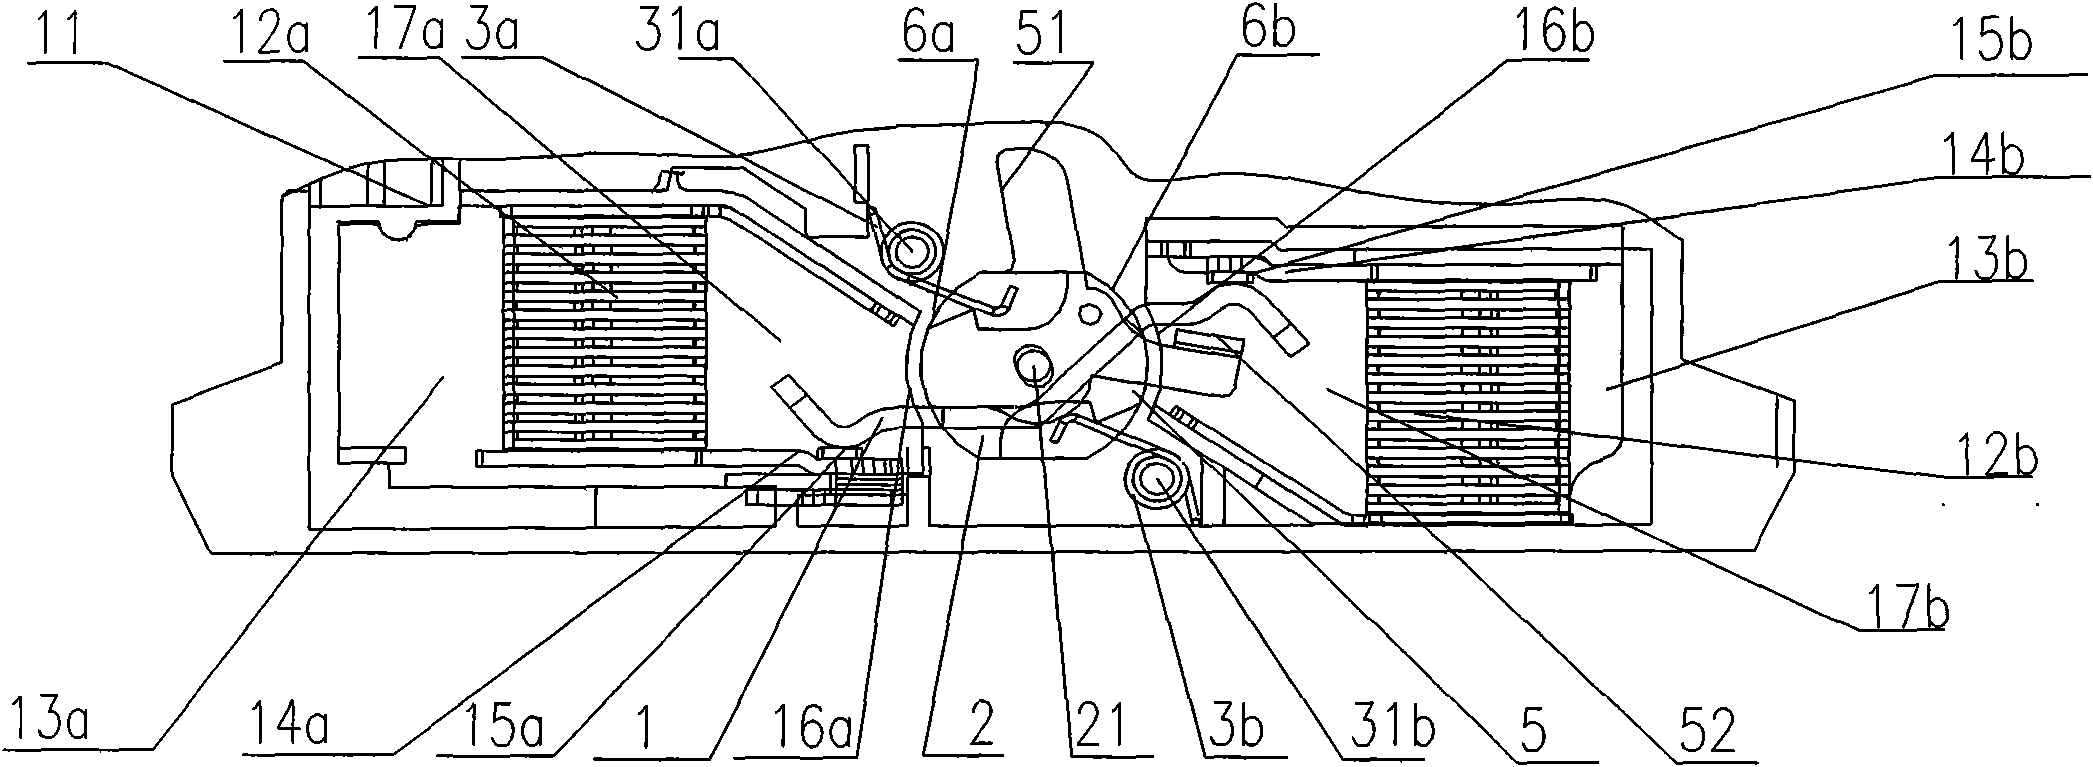 Circuit-breaker automatic closing contact device with high breaking capacity